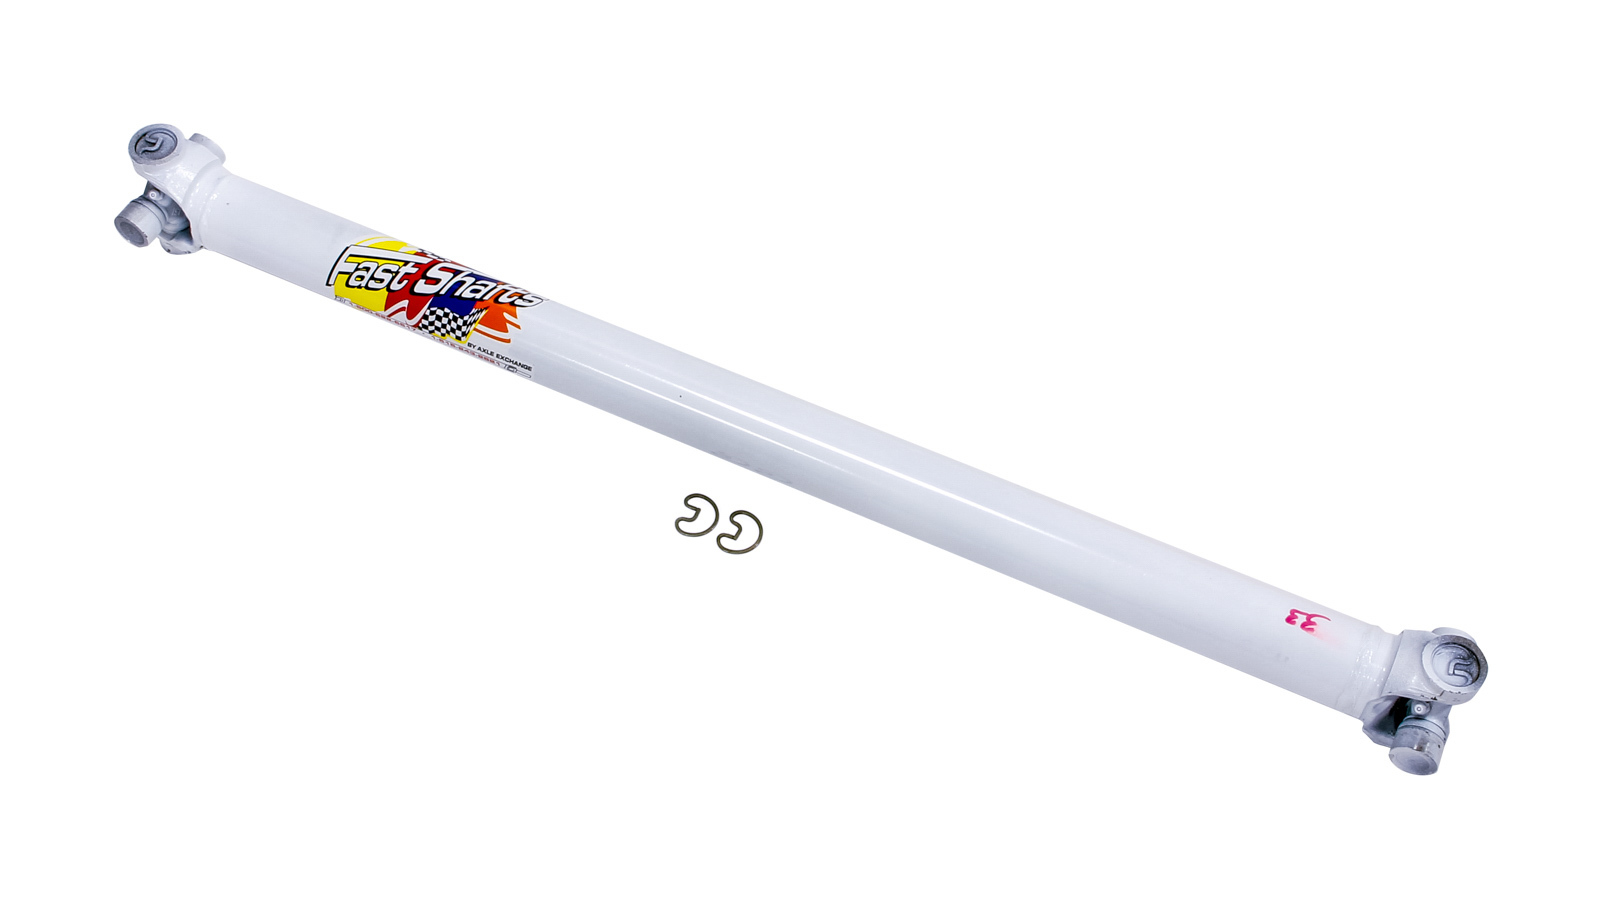 Fast Shafts 2083LM-39 Drive Shaft, 39 in Long, 2 in OD, 1310 U-Joints, Chromoly, White Paint, Universal, Each